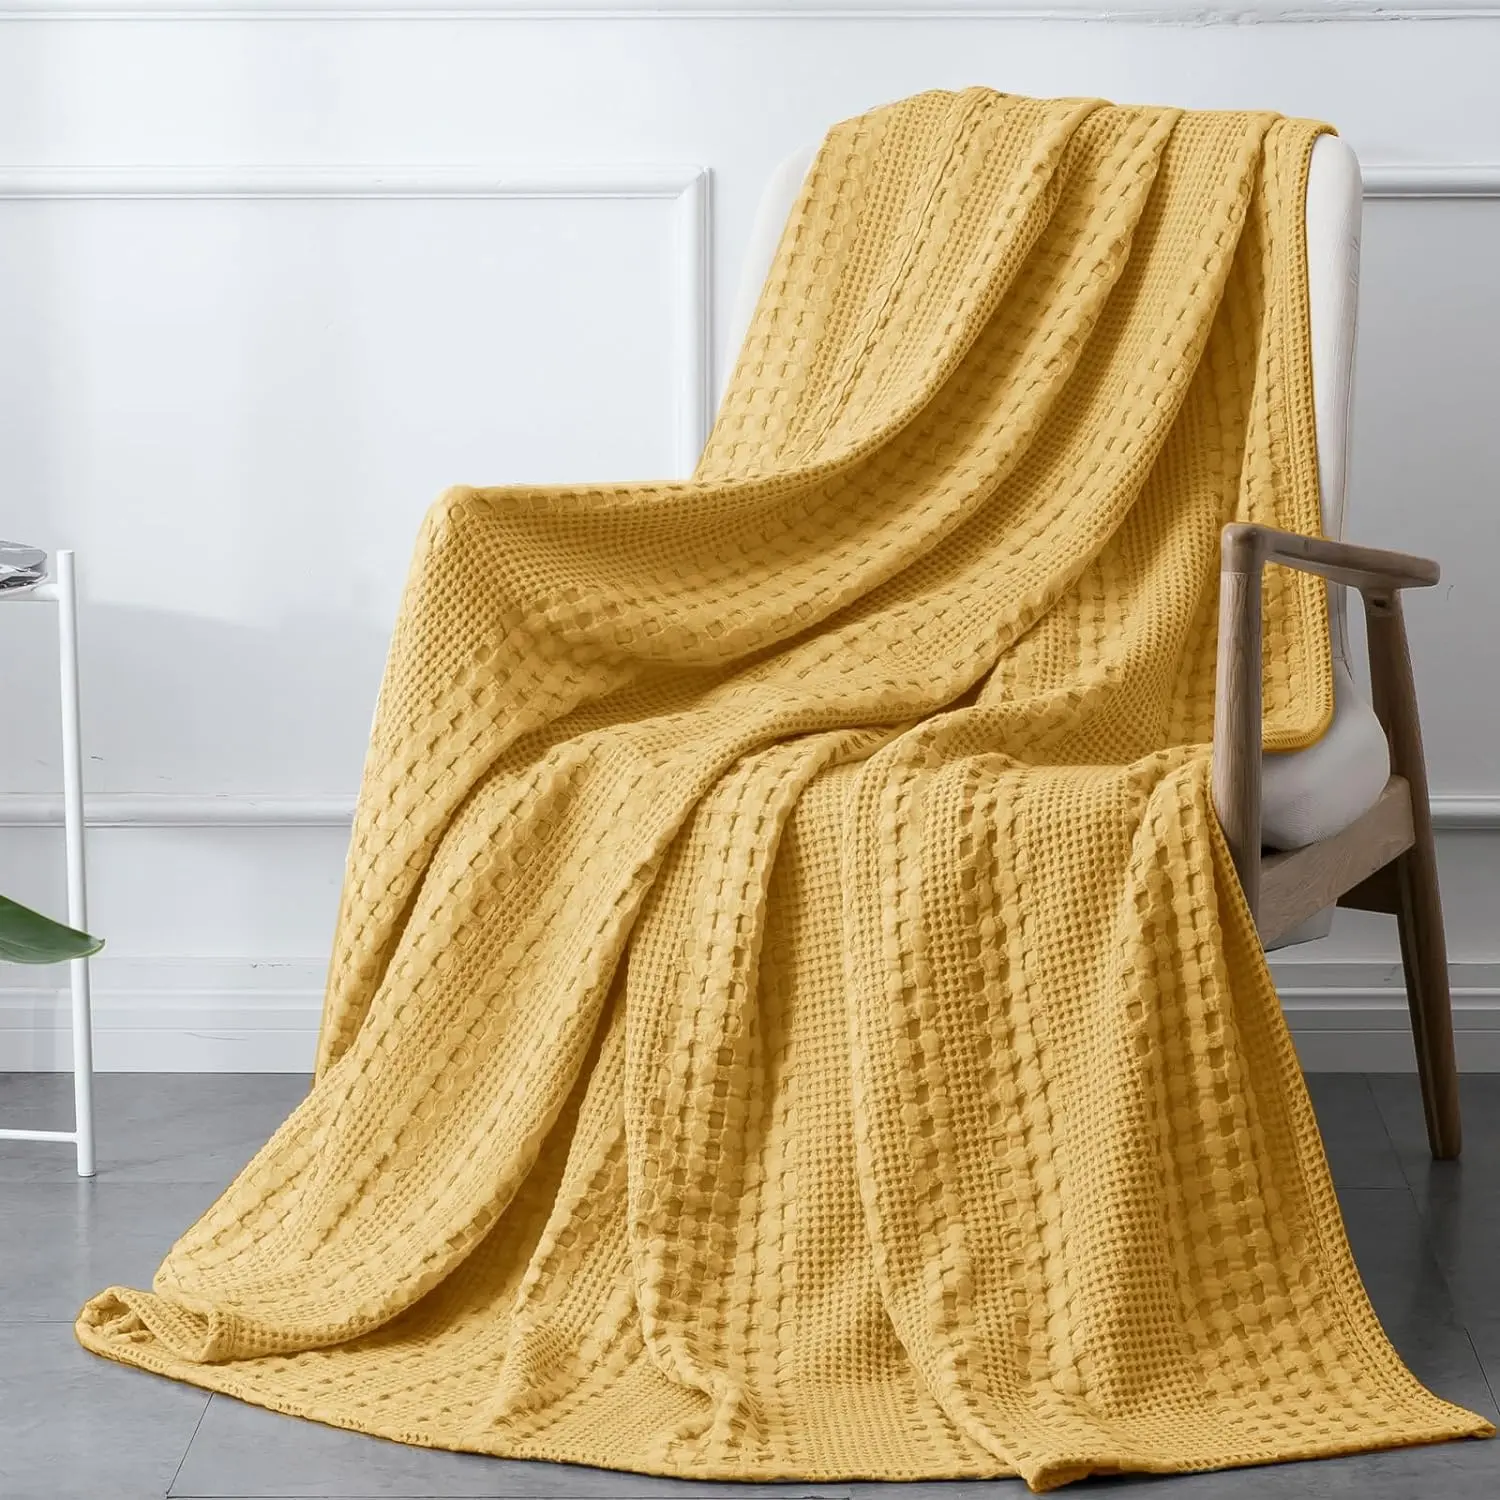 Comfortable And Soft Cotton Textured Knit Blankets Wholesale Price Organic Cotton Waffle Chunky Knit Throw Knitted Blanket